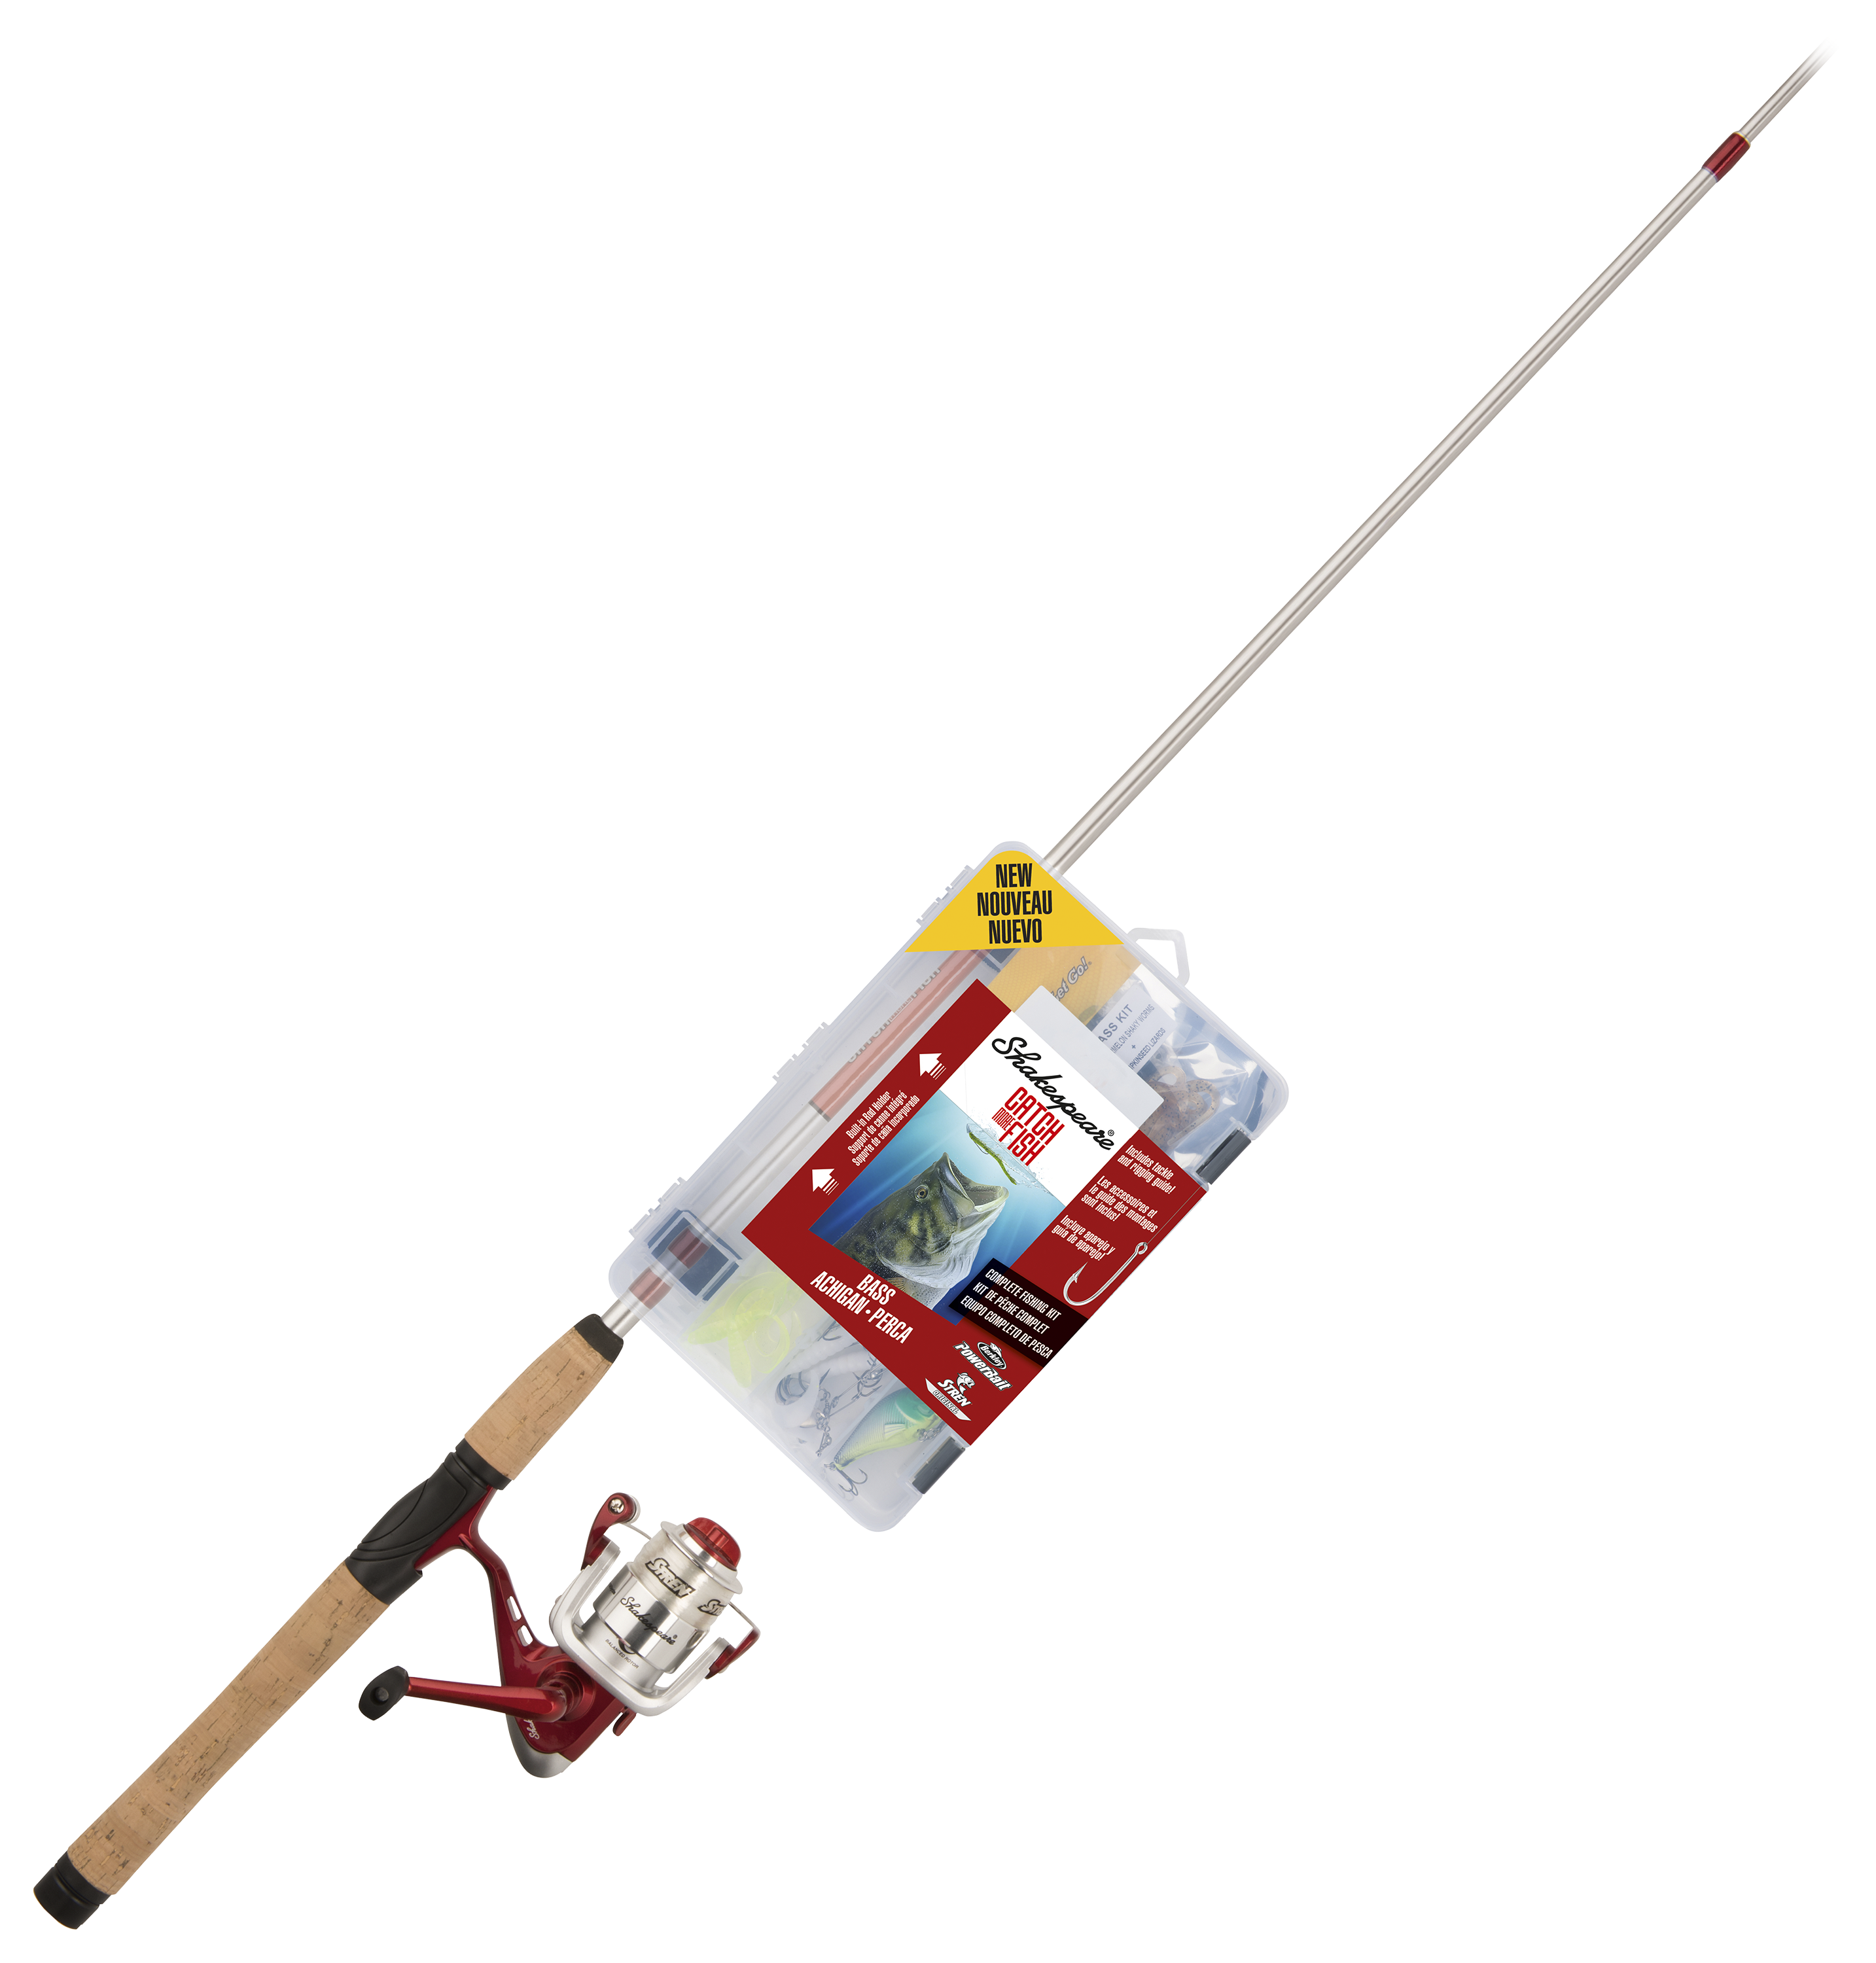 Shakespeare Catch More Fish Spinning Rod and Reel Combo for Bass